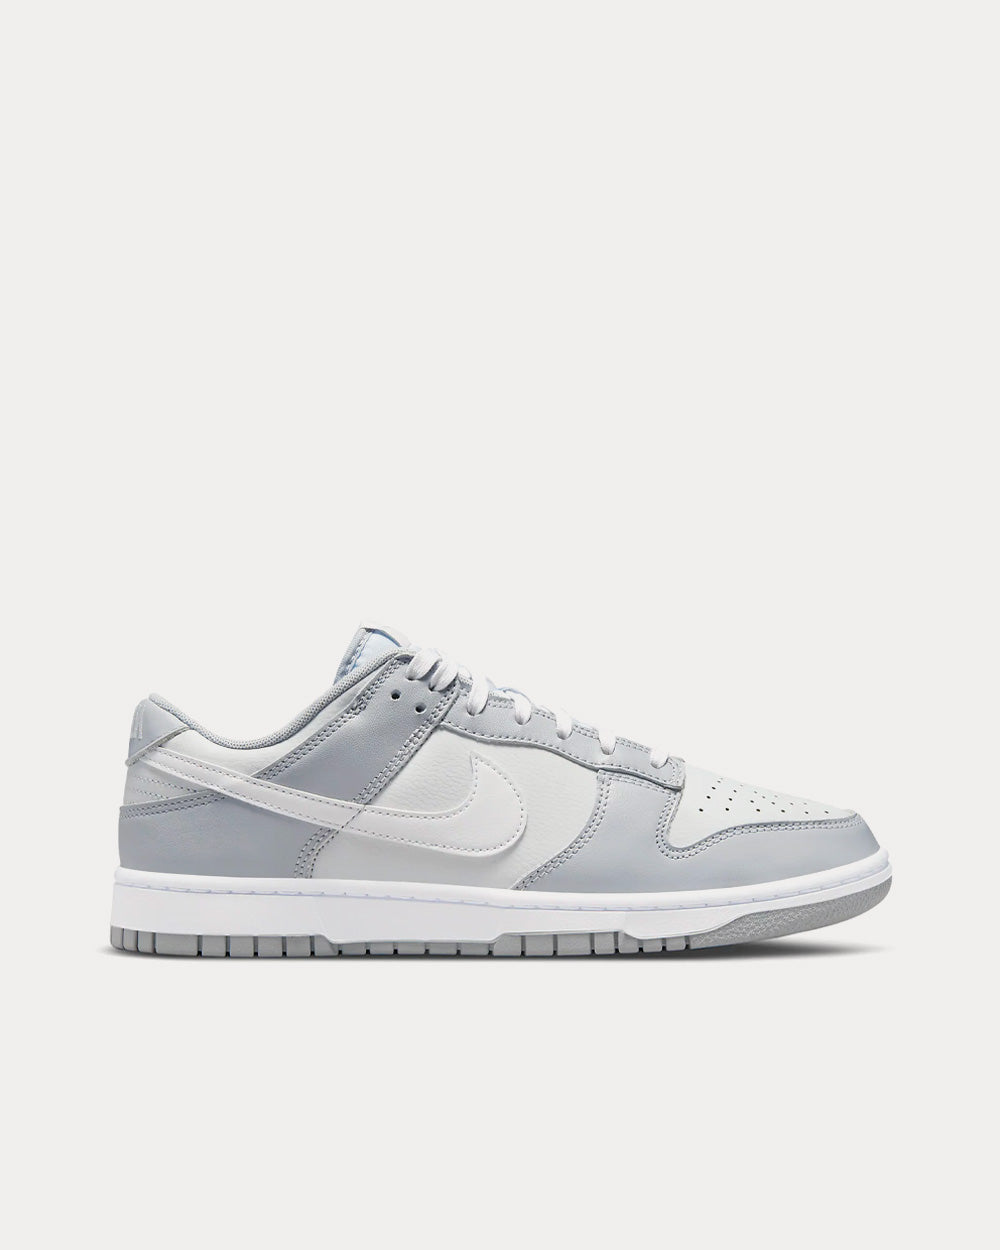 Nike Dunk Low Retro 'Two Tone Grey' Pure Platinum / Wolf